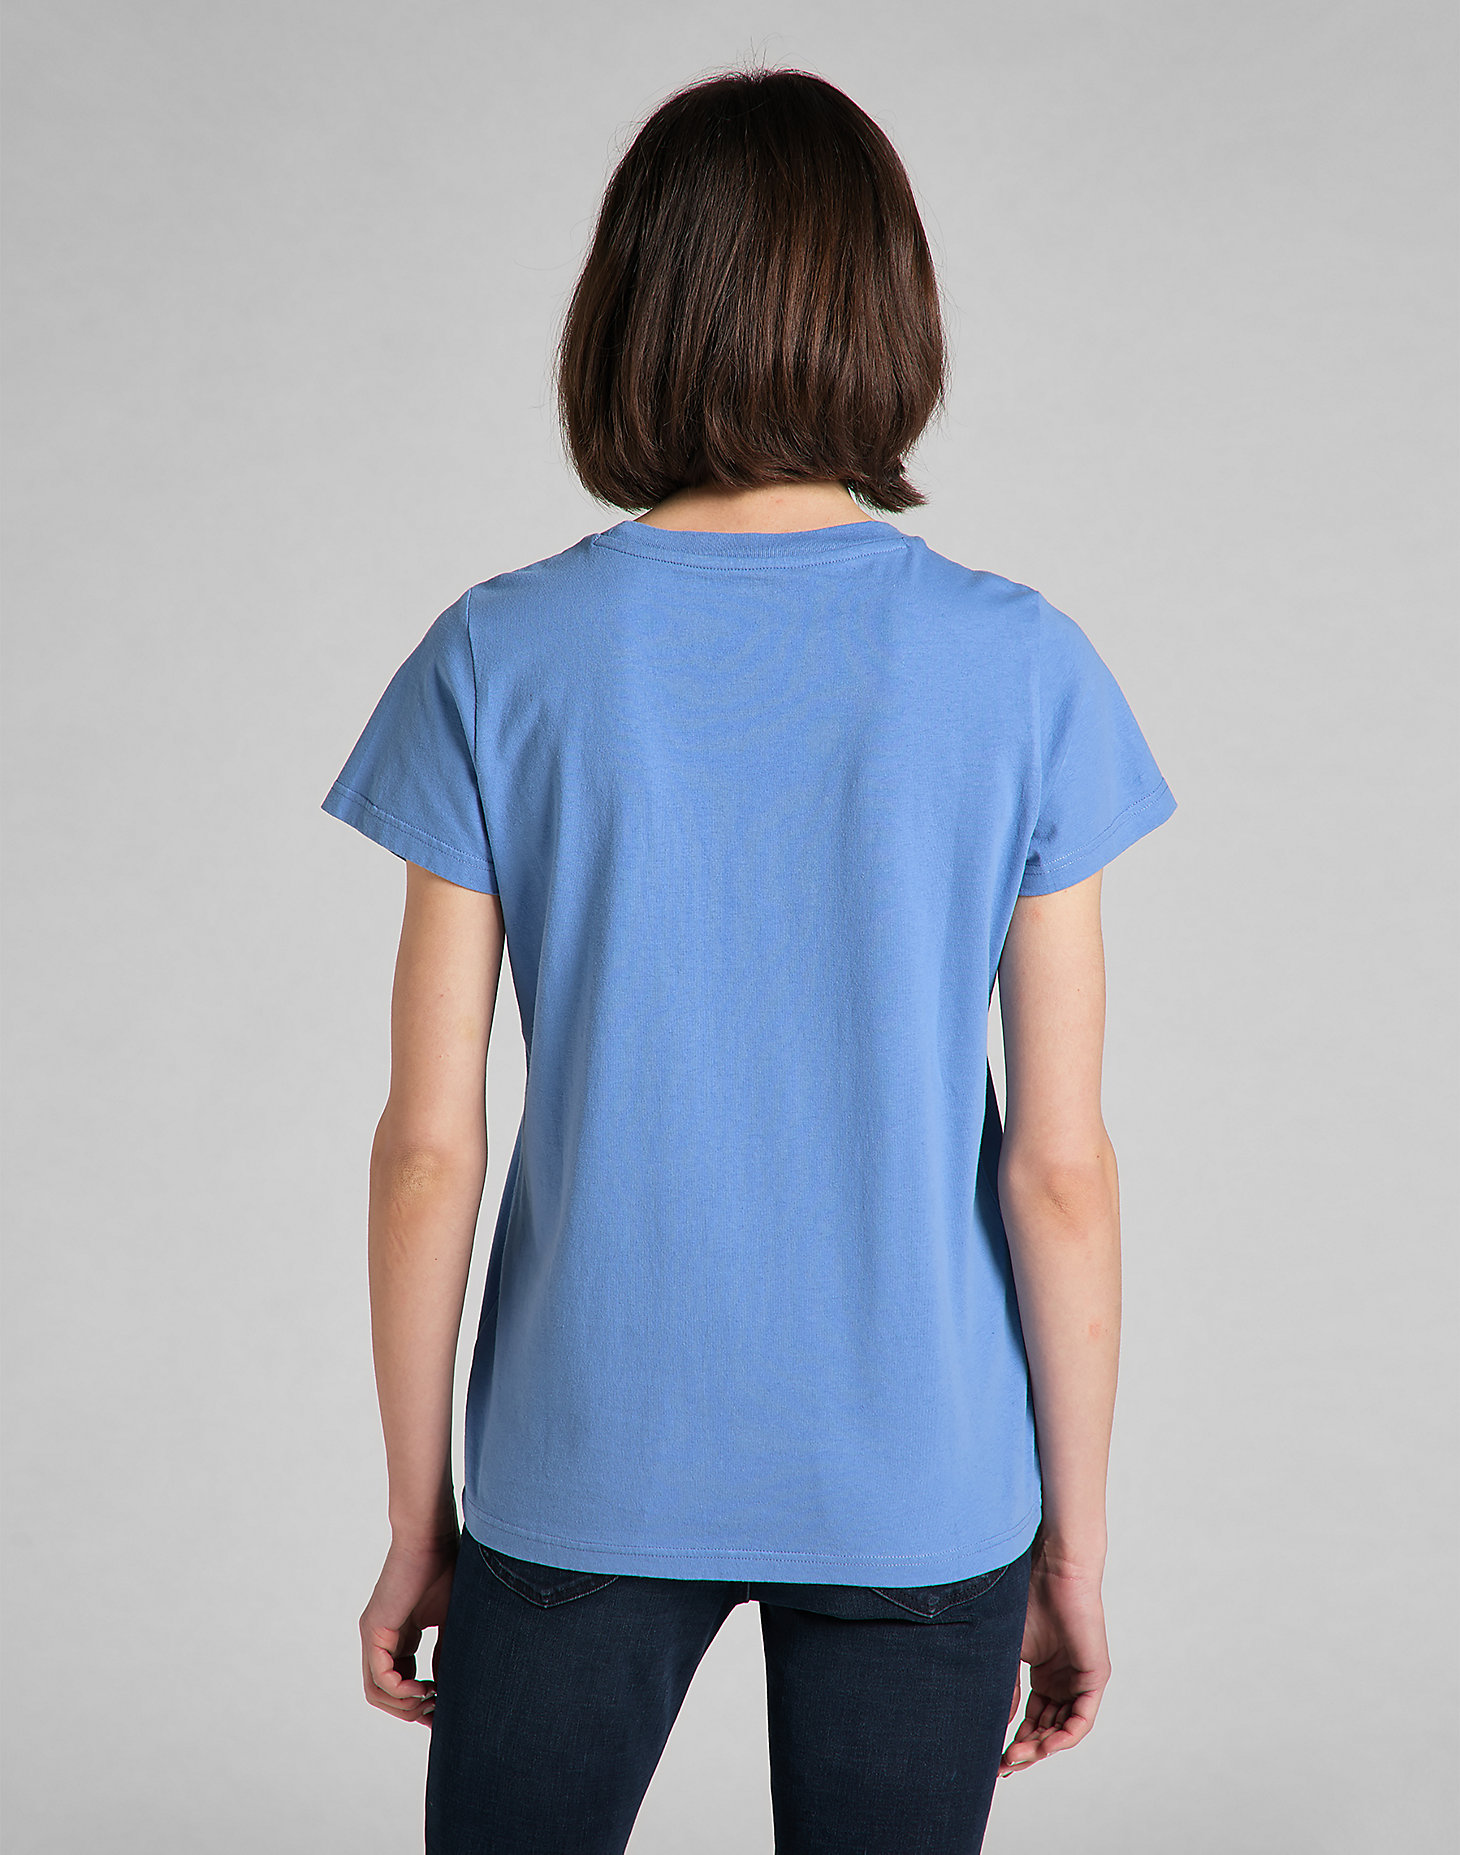 Graphic Tee in Blue Yonder alternative view 1